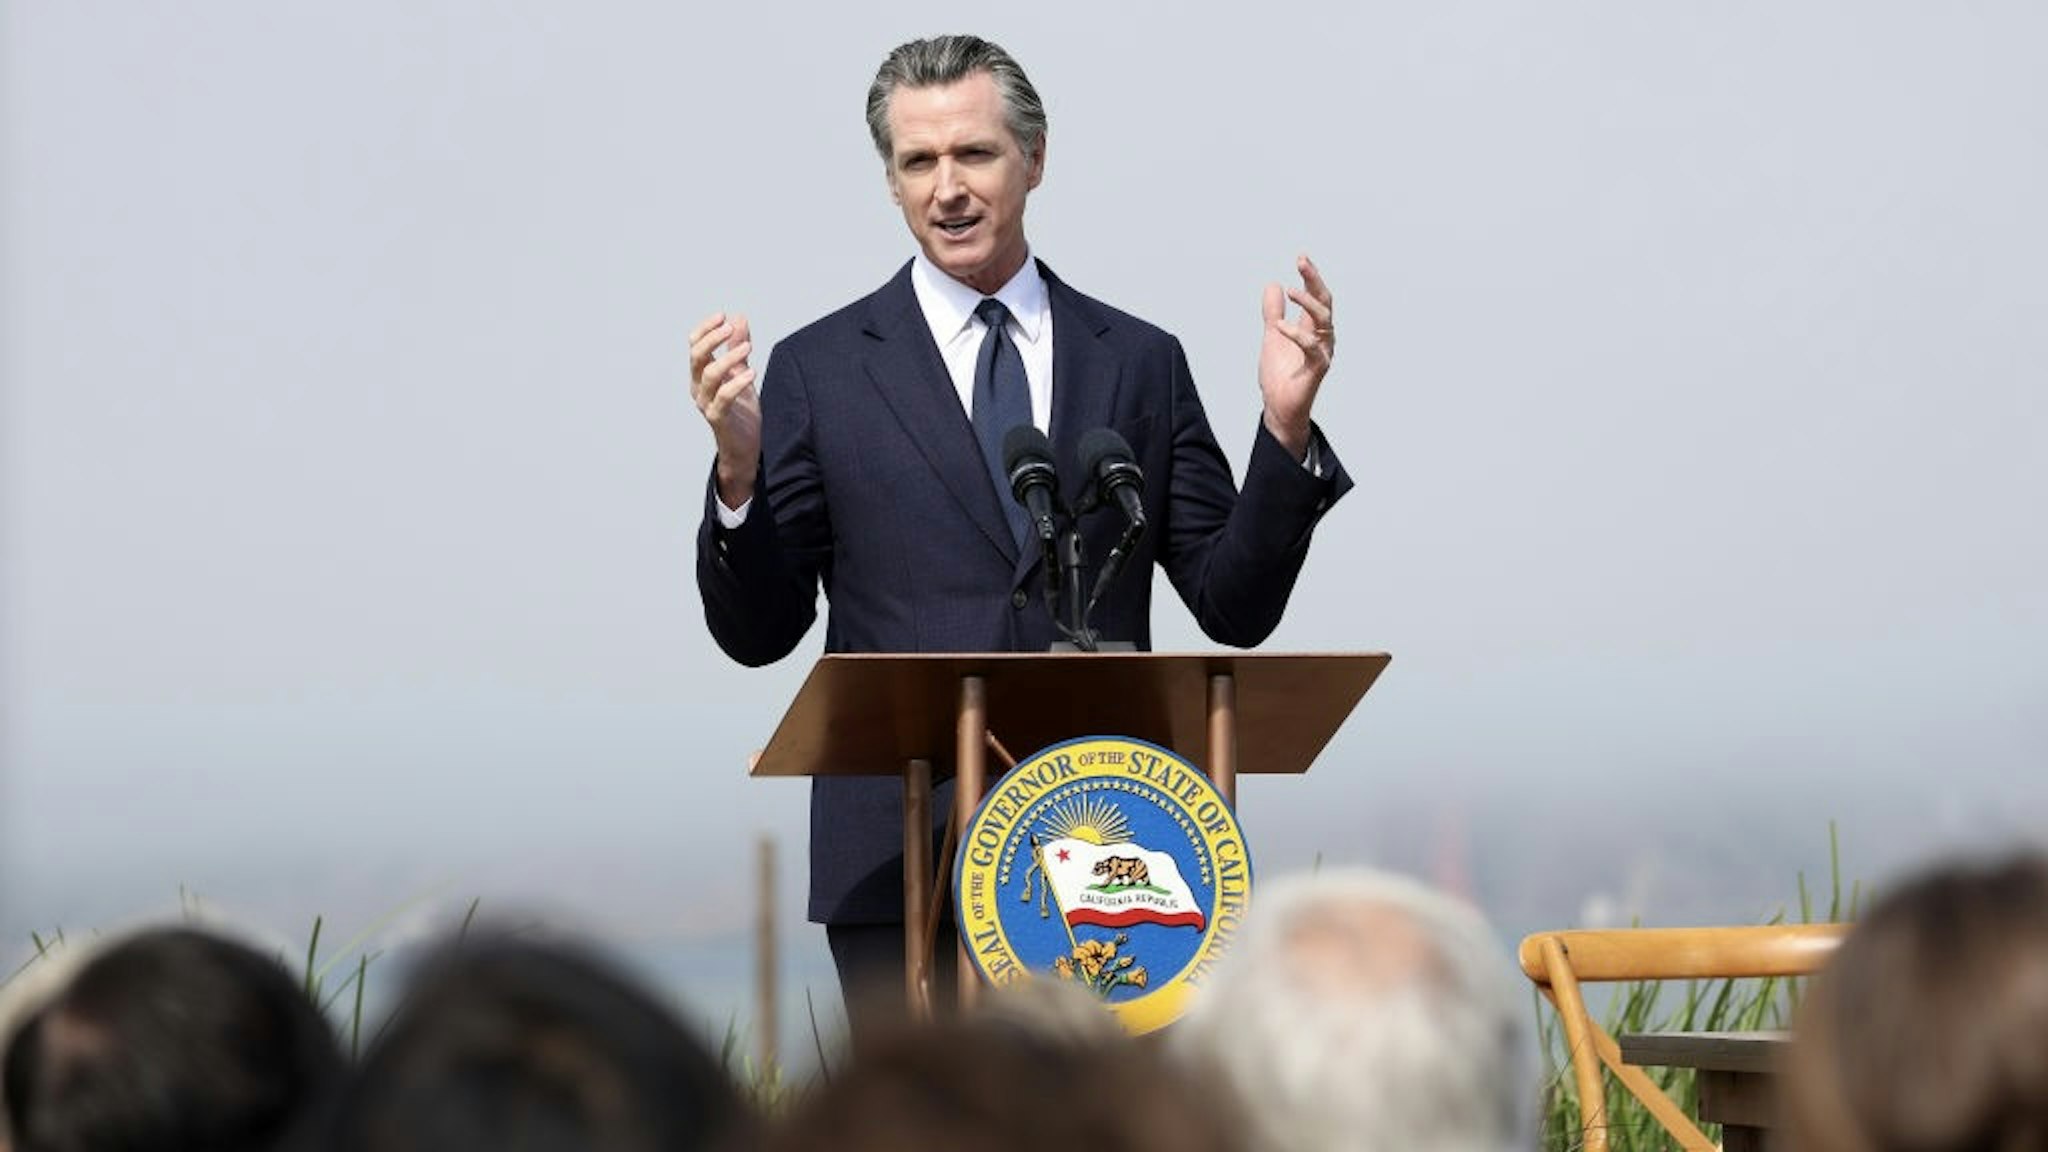 California Gov. Newsom And West Coast Leaders Sign Climate Agreement SAN FRANCISCO, CALIFORNIA - OCTOBER 06: (L-R) California Gov. Gavin Newsom speaks during a press conference on October 06, 2022 in San Francisco, California. California Gov. Gavin Newsom was joined by the governors of Washington, Oregon and the premier of British Columbia to sign a new climate agreement to further expand the region’s climate partnership. (Photo by Justin Sullivan/Getty Images) Justin Sullivan / Staff